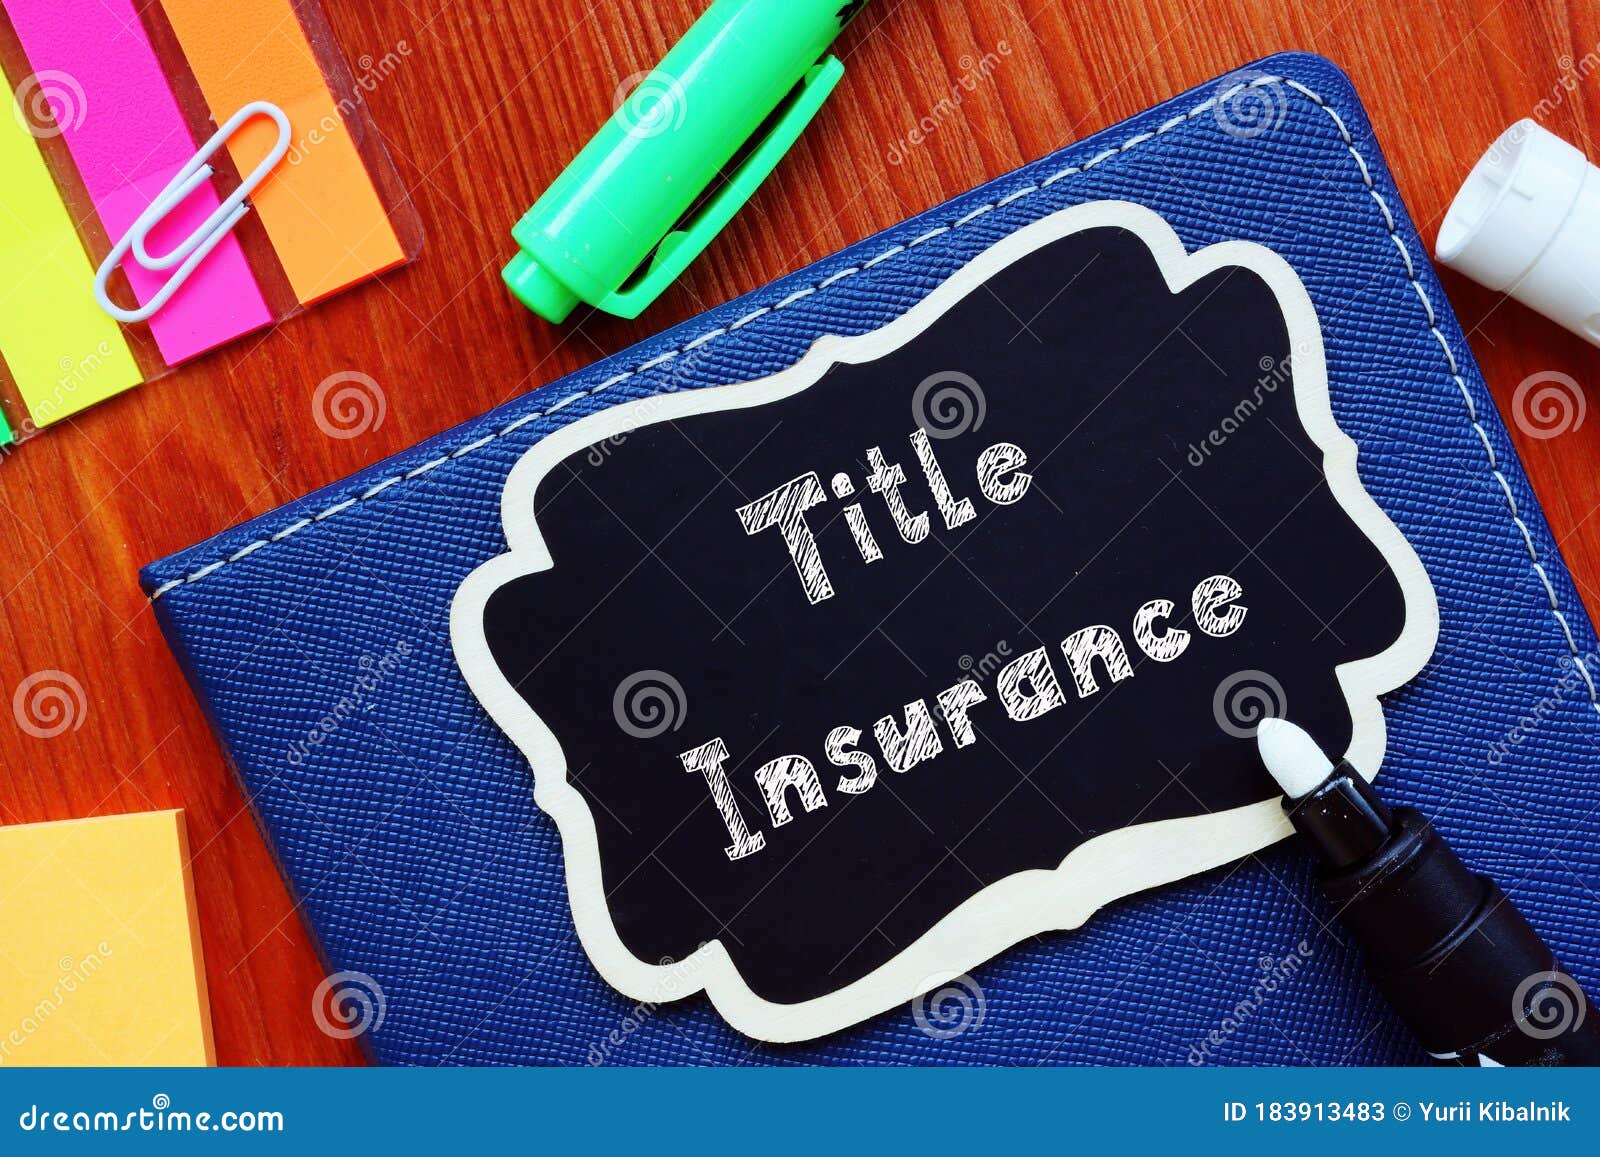 financial concept about title insurance with phrase on the piece of paper